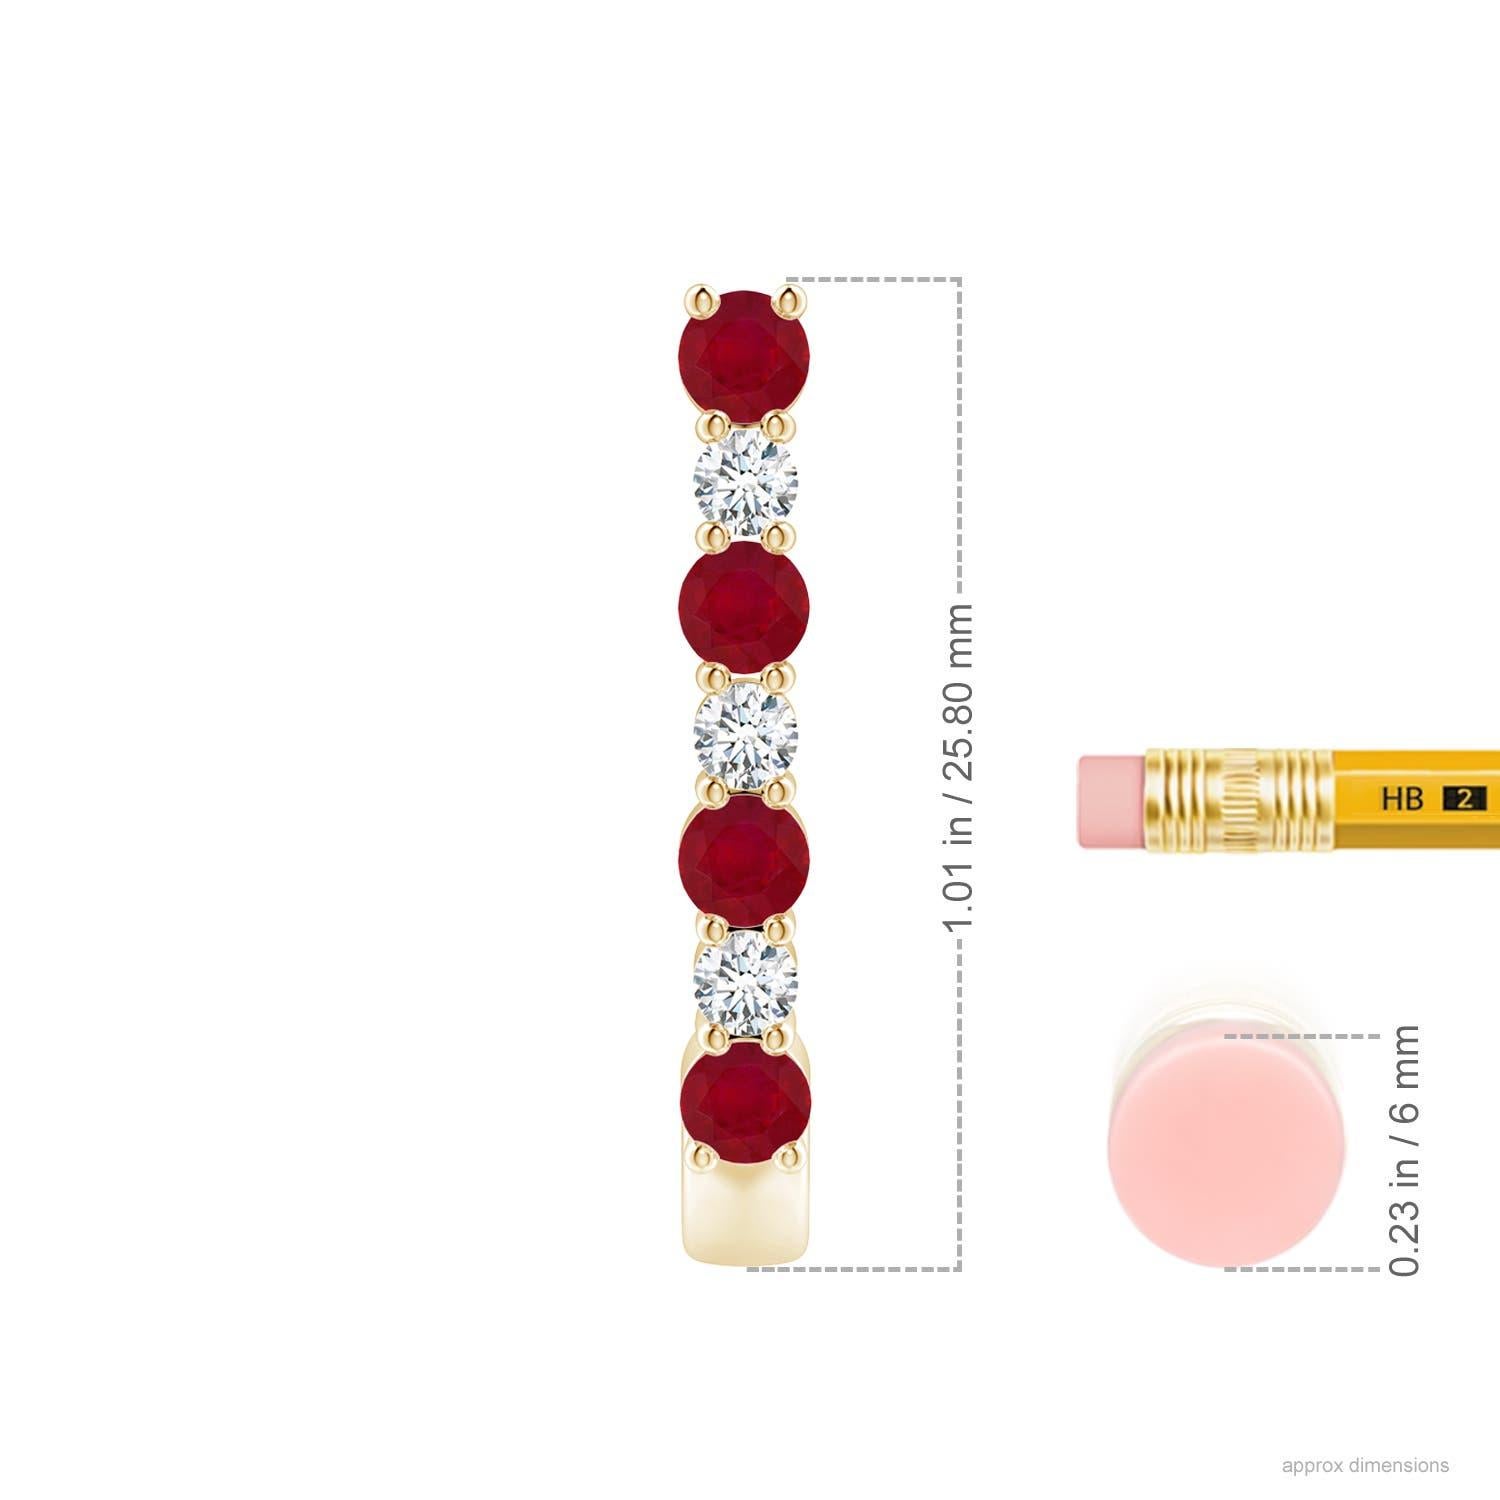 These stunning ruby and diamond hoop earrings are exquisitely crafted in 14k yellow gold. The J hoops are alternately studded with bright red rubies and sparkling diamonds for a captivating effect.
Ruby is the Birthstone for July and traditional